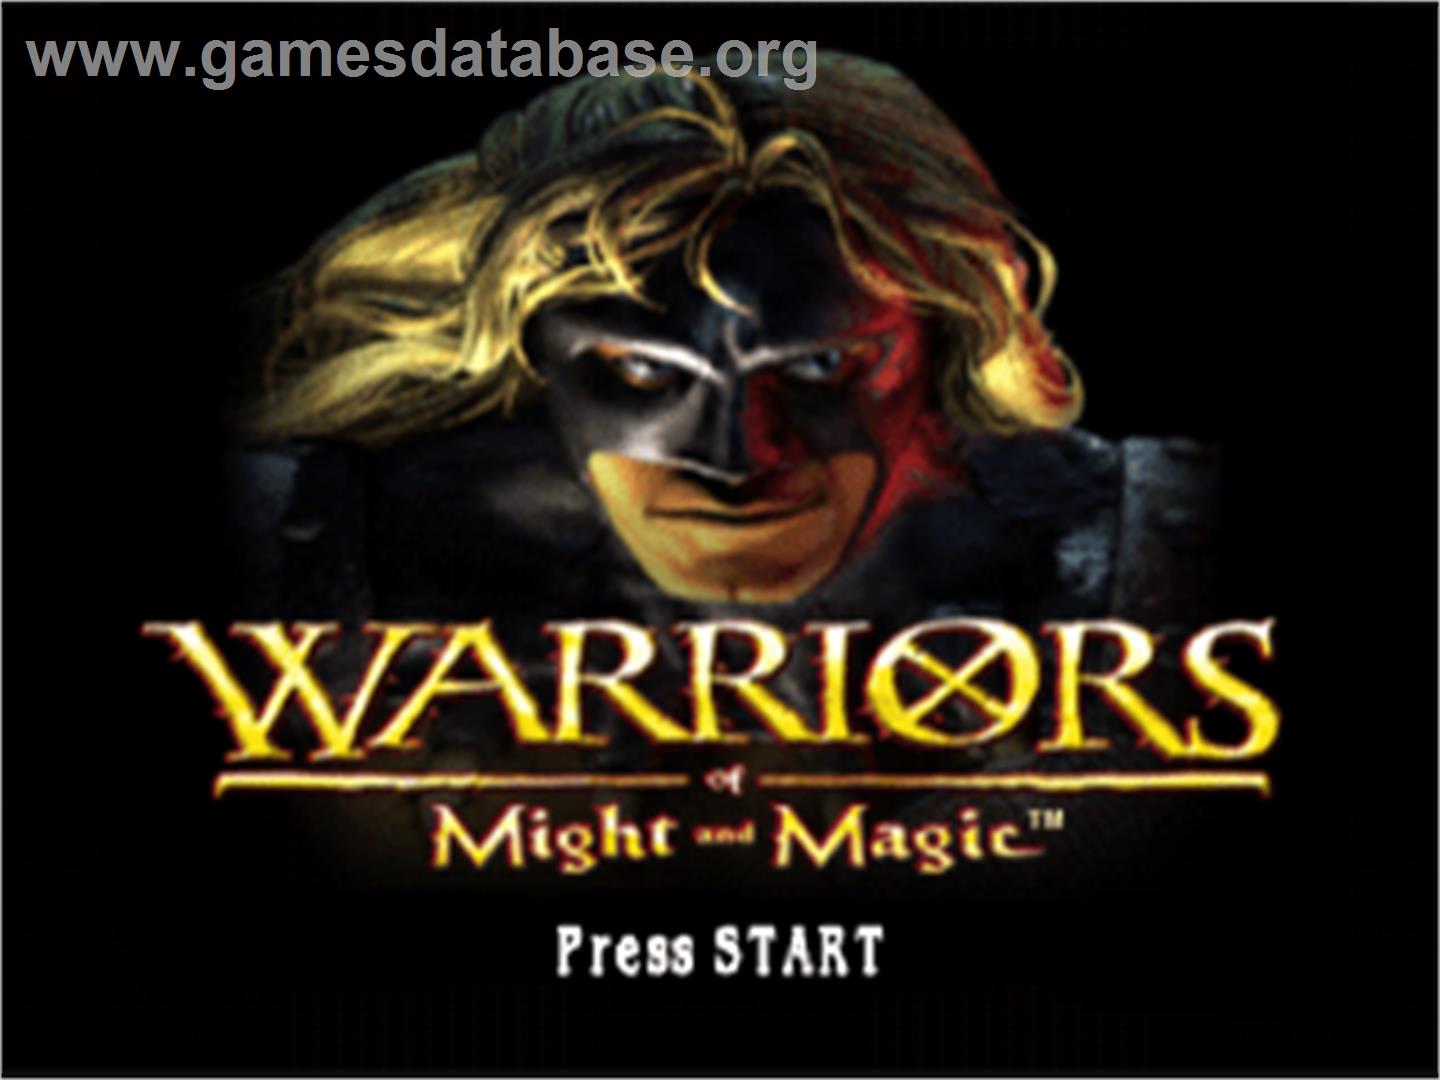 Warriors of Might and Magic - Sony Playstation - Artwork - Title Screen